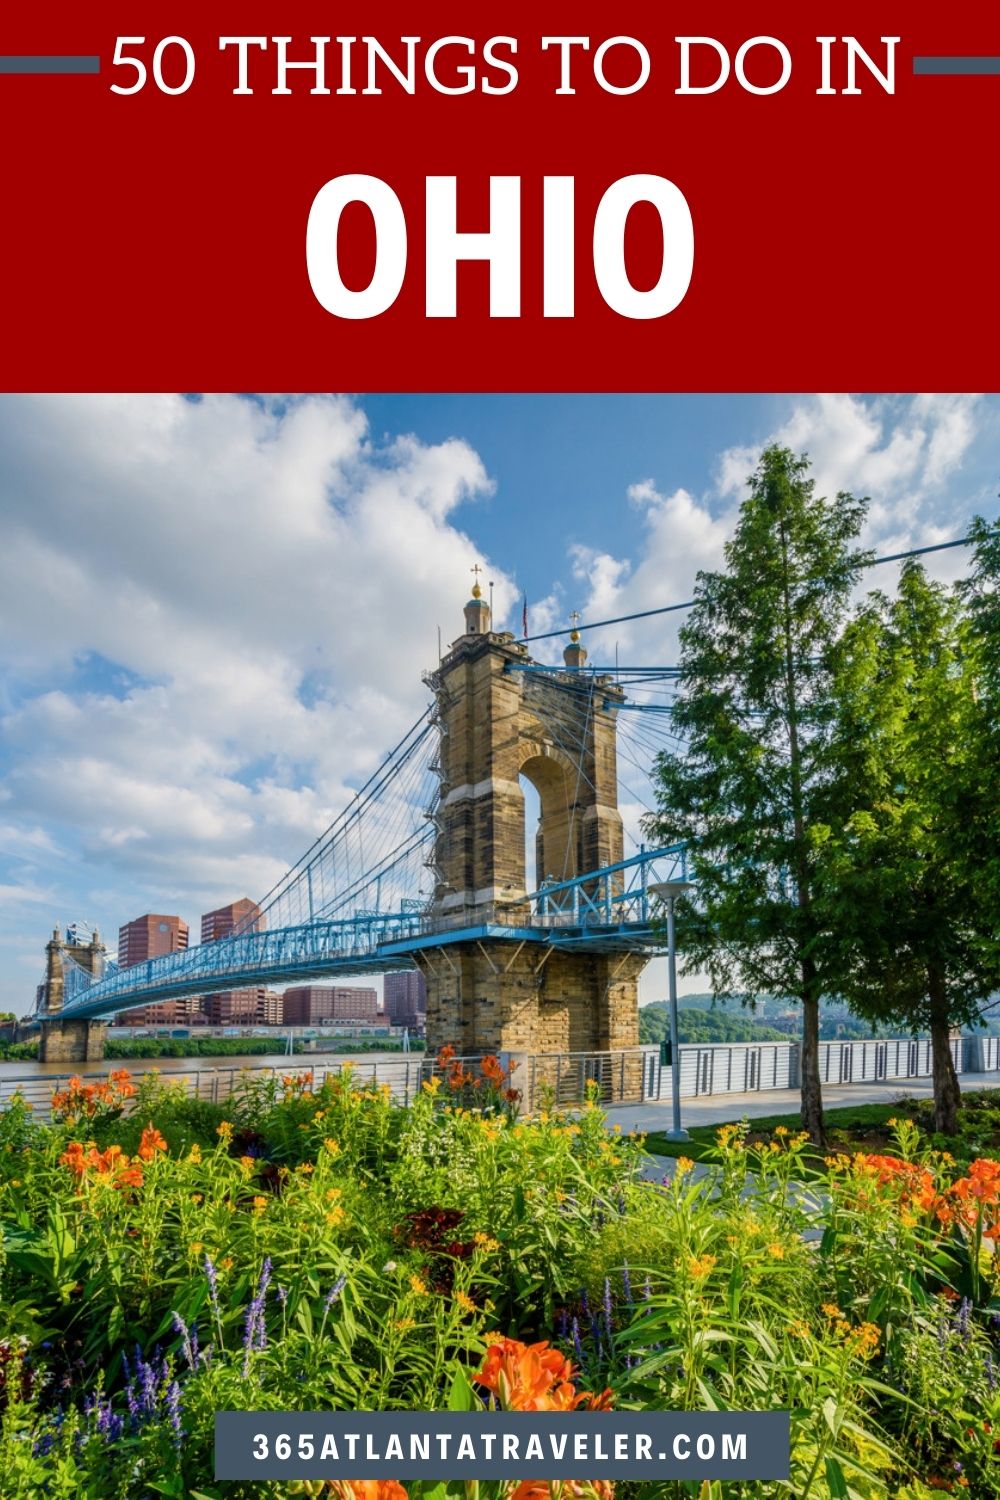 50 THINGS TO DO IN OHIO THAT YOU'RE GOING TO LOVE